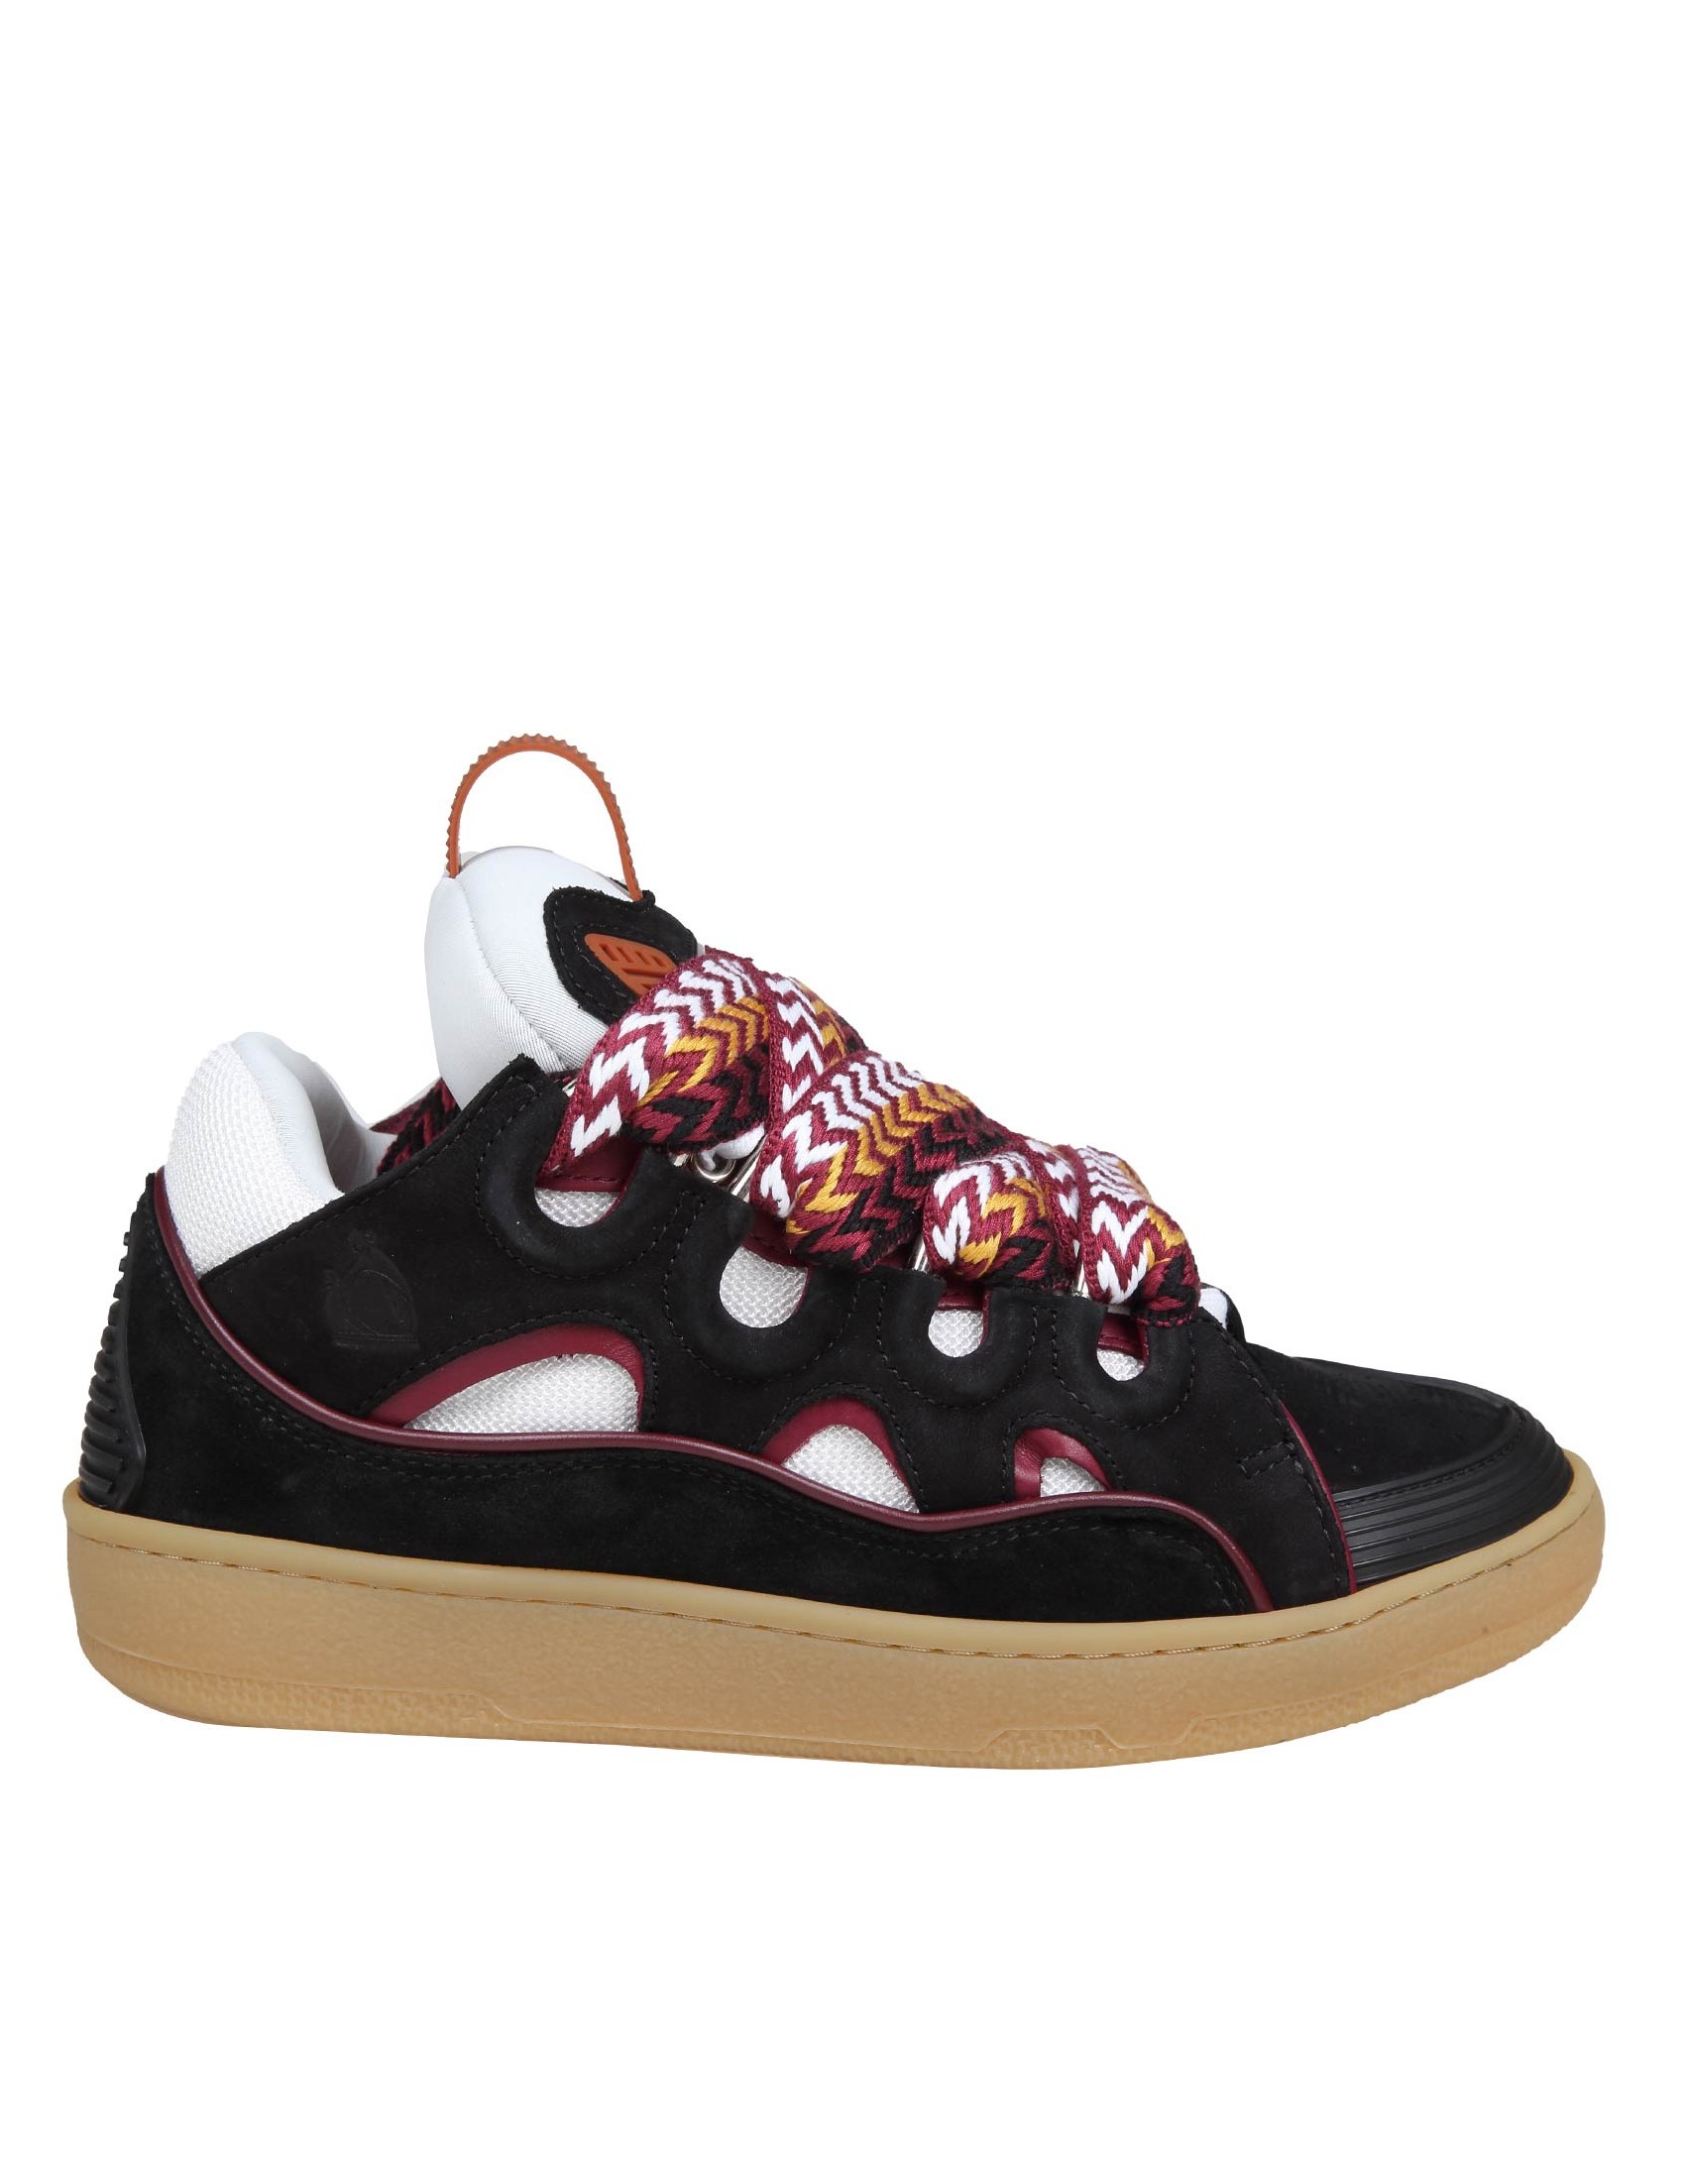 LANVIN CURB SNEAKERS IN WHITE AND BORDEAUX LEATHER AND SUEDE